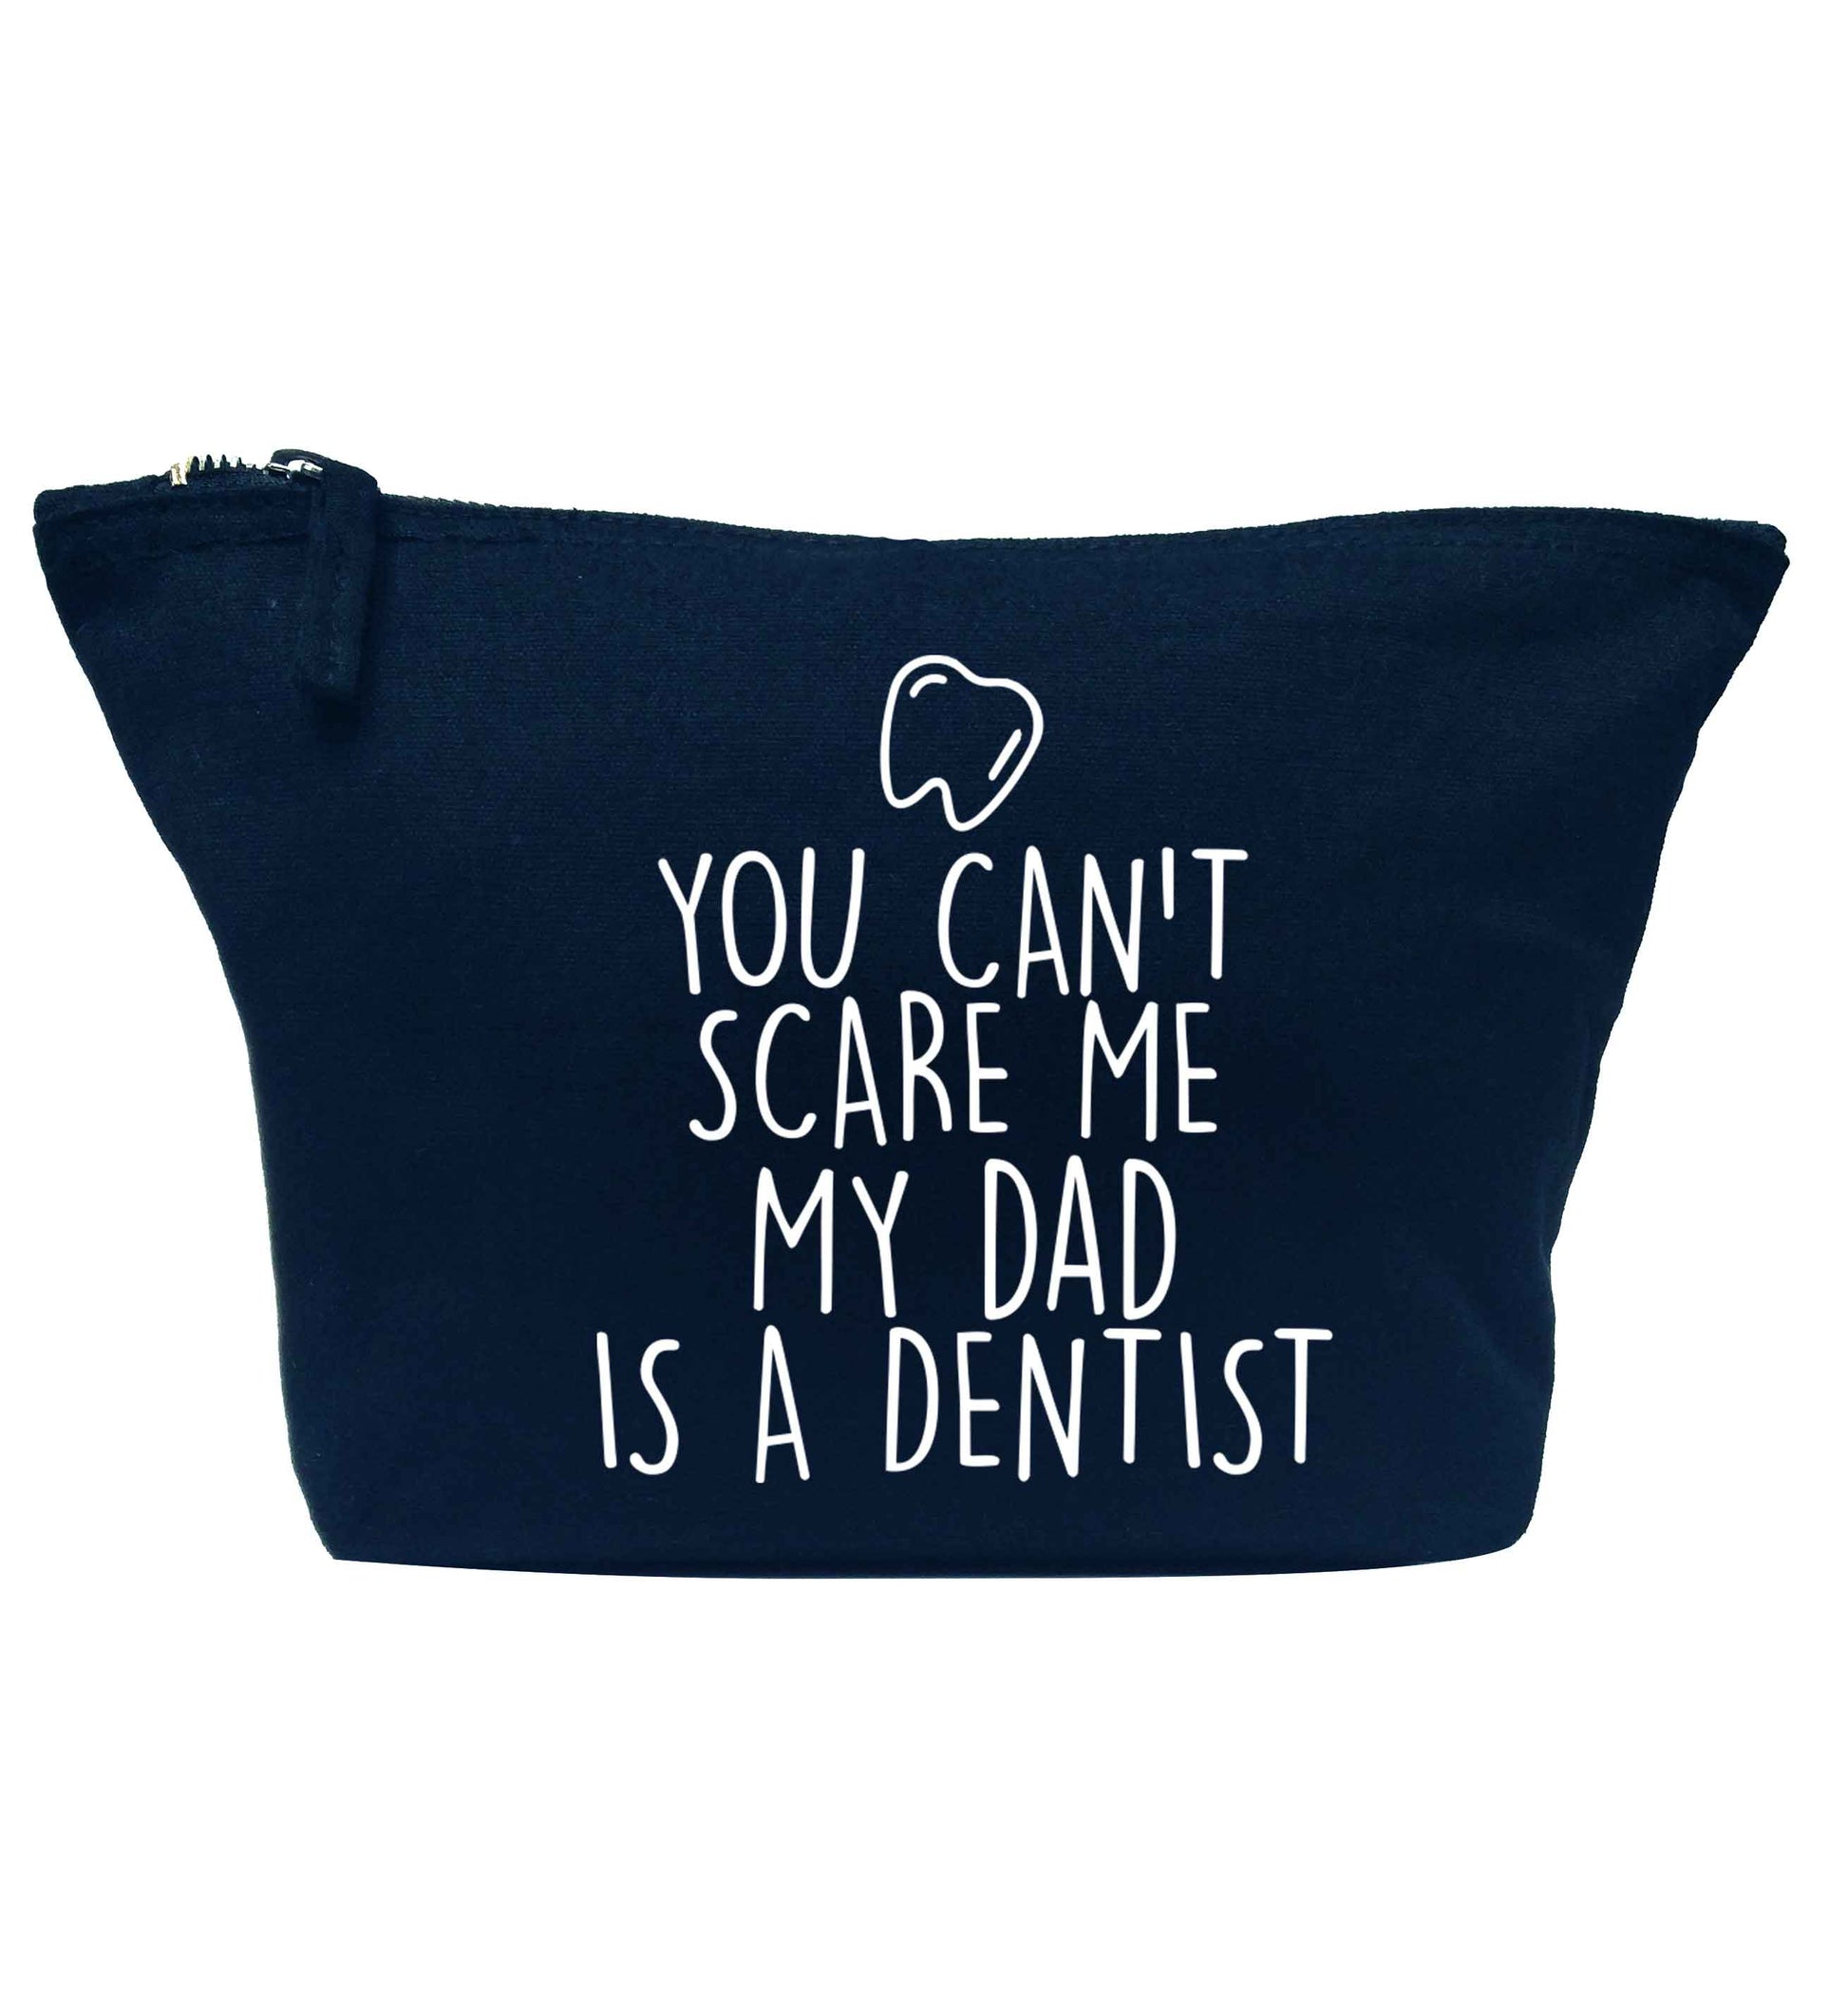 You can't scare me my dad is a dentist navy makeup bag